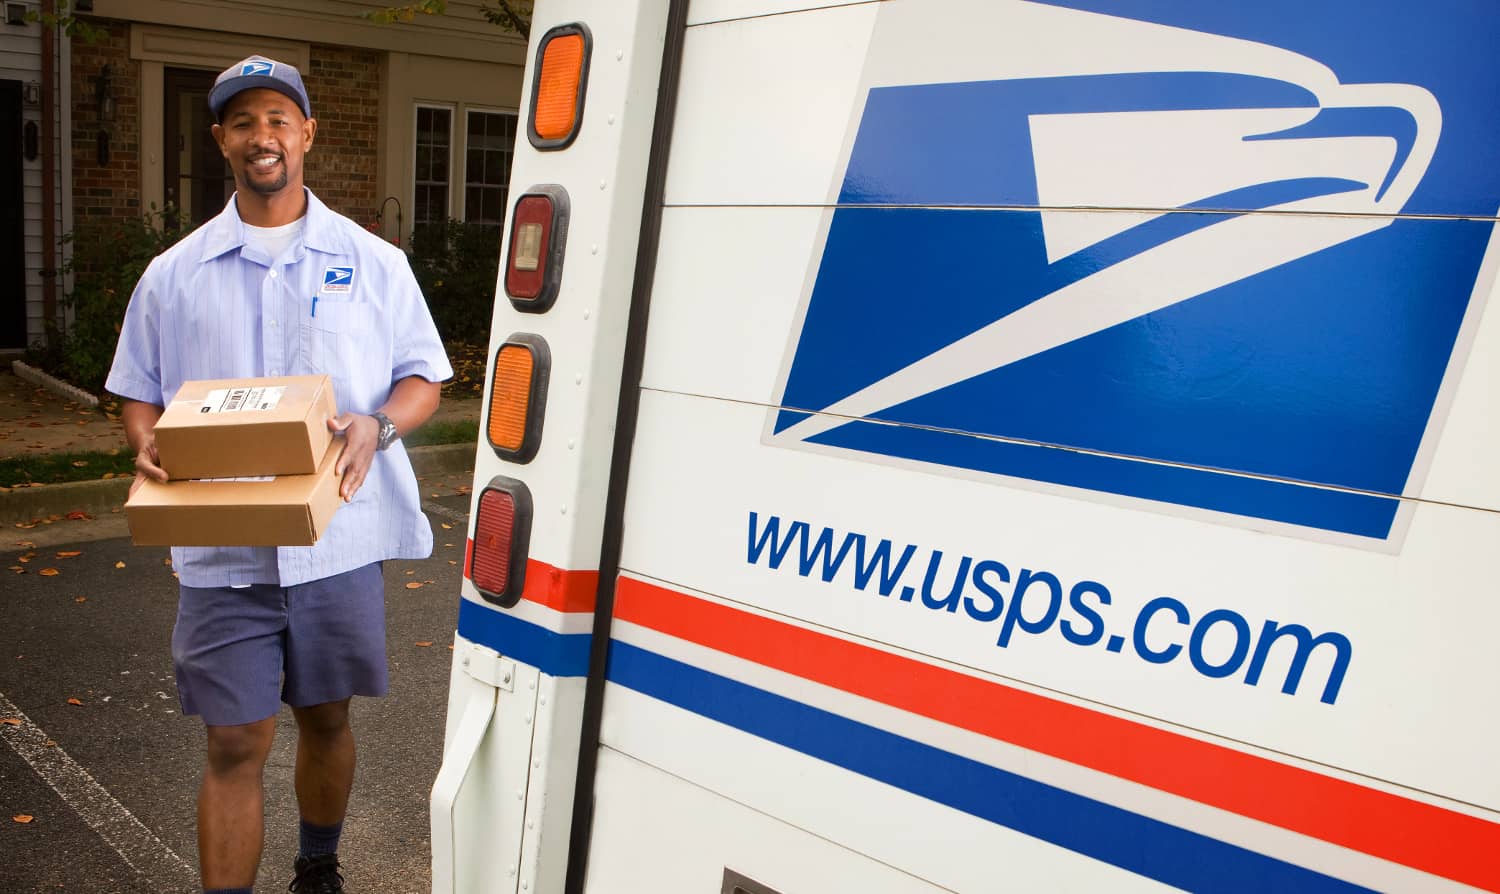 Amazon's sweetheart deal with the USPS - FreightWaves